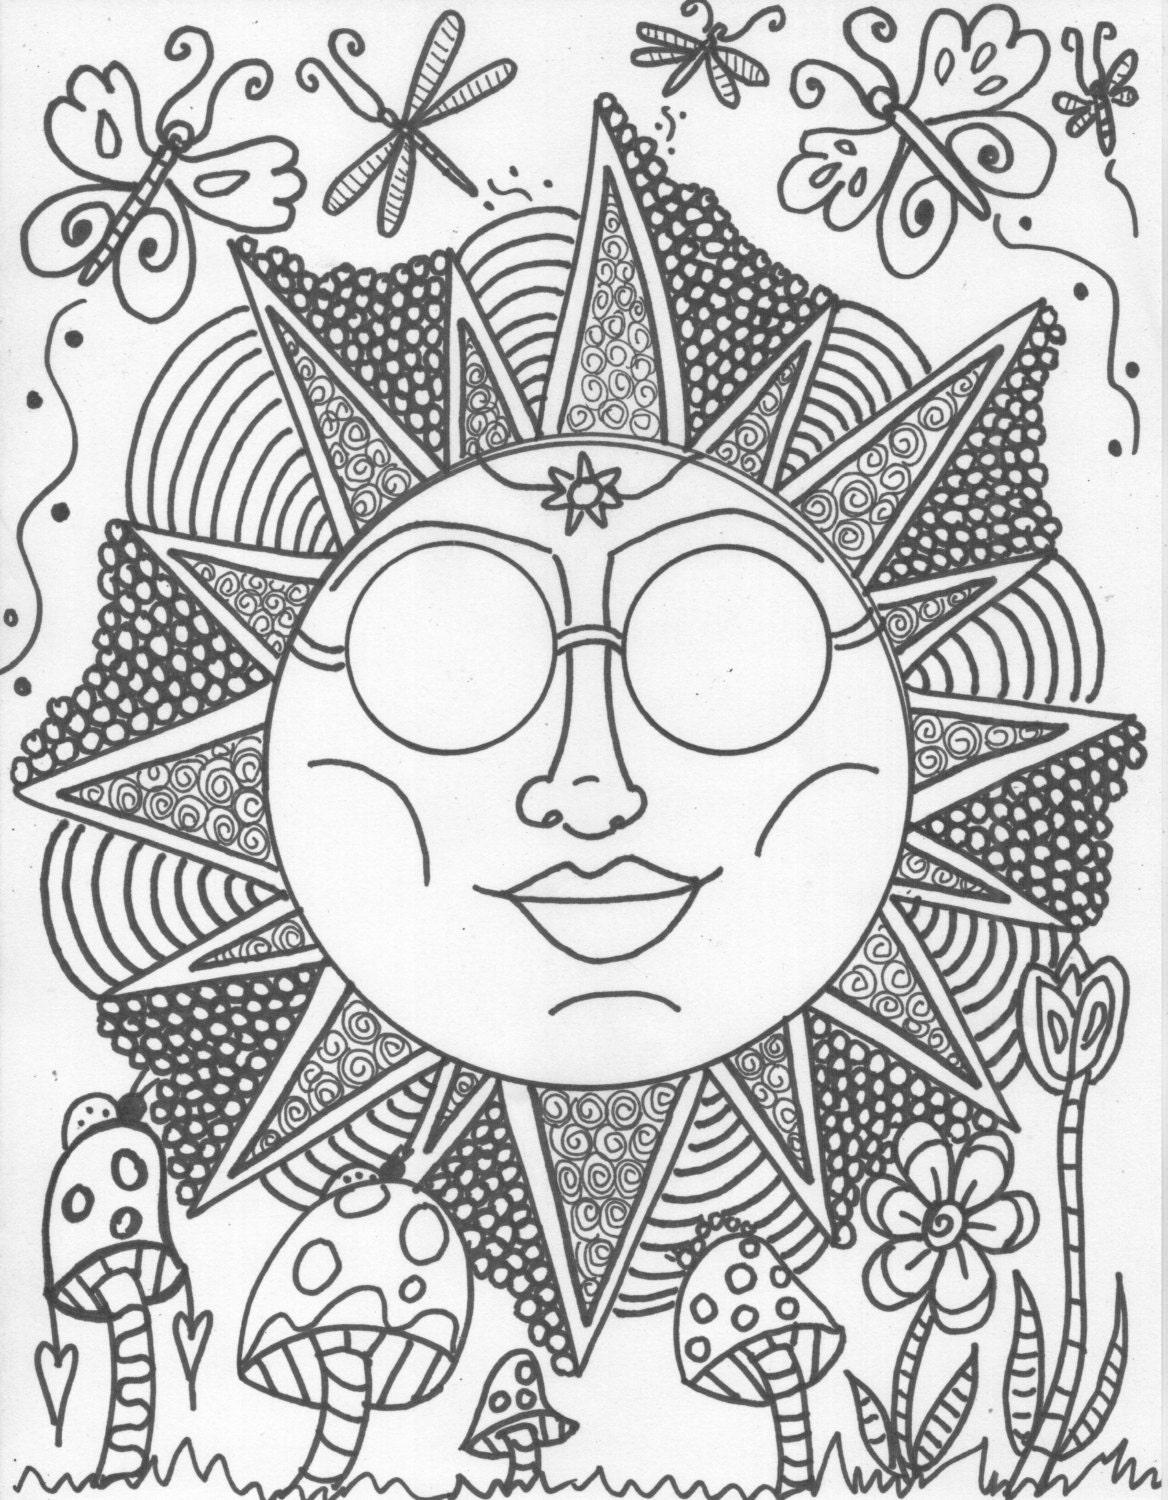 Hippie Custom Coloring Book coloring book pages by DawnCollinsArt